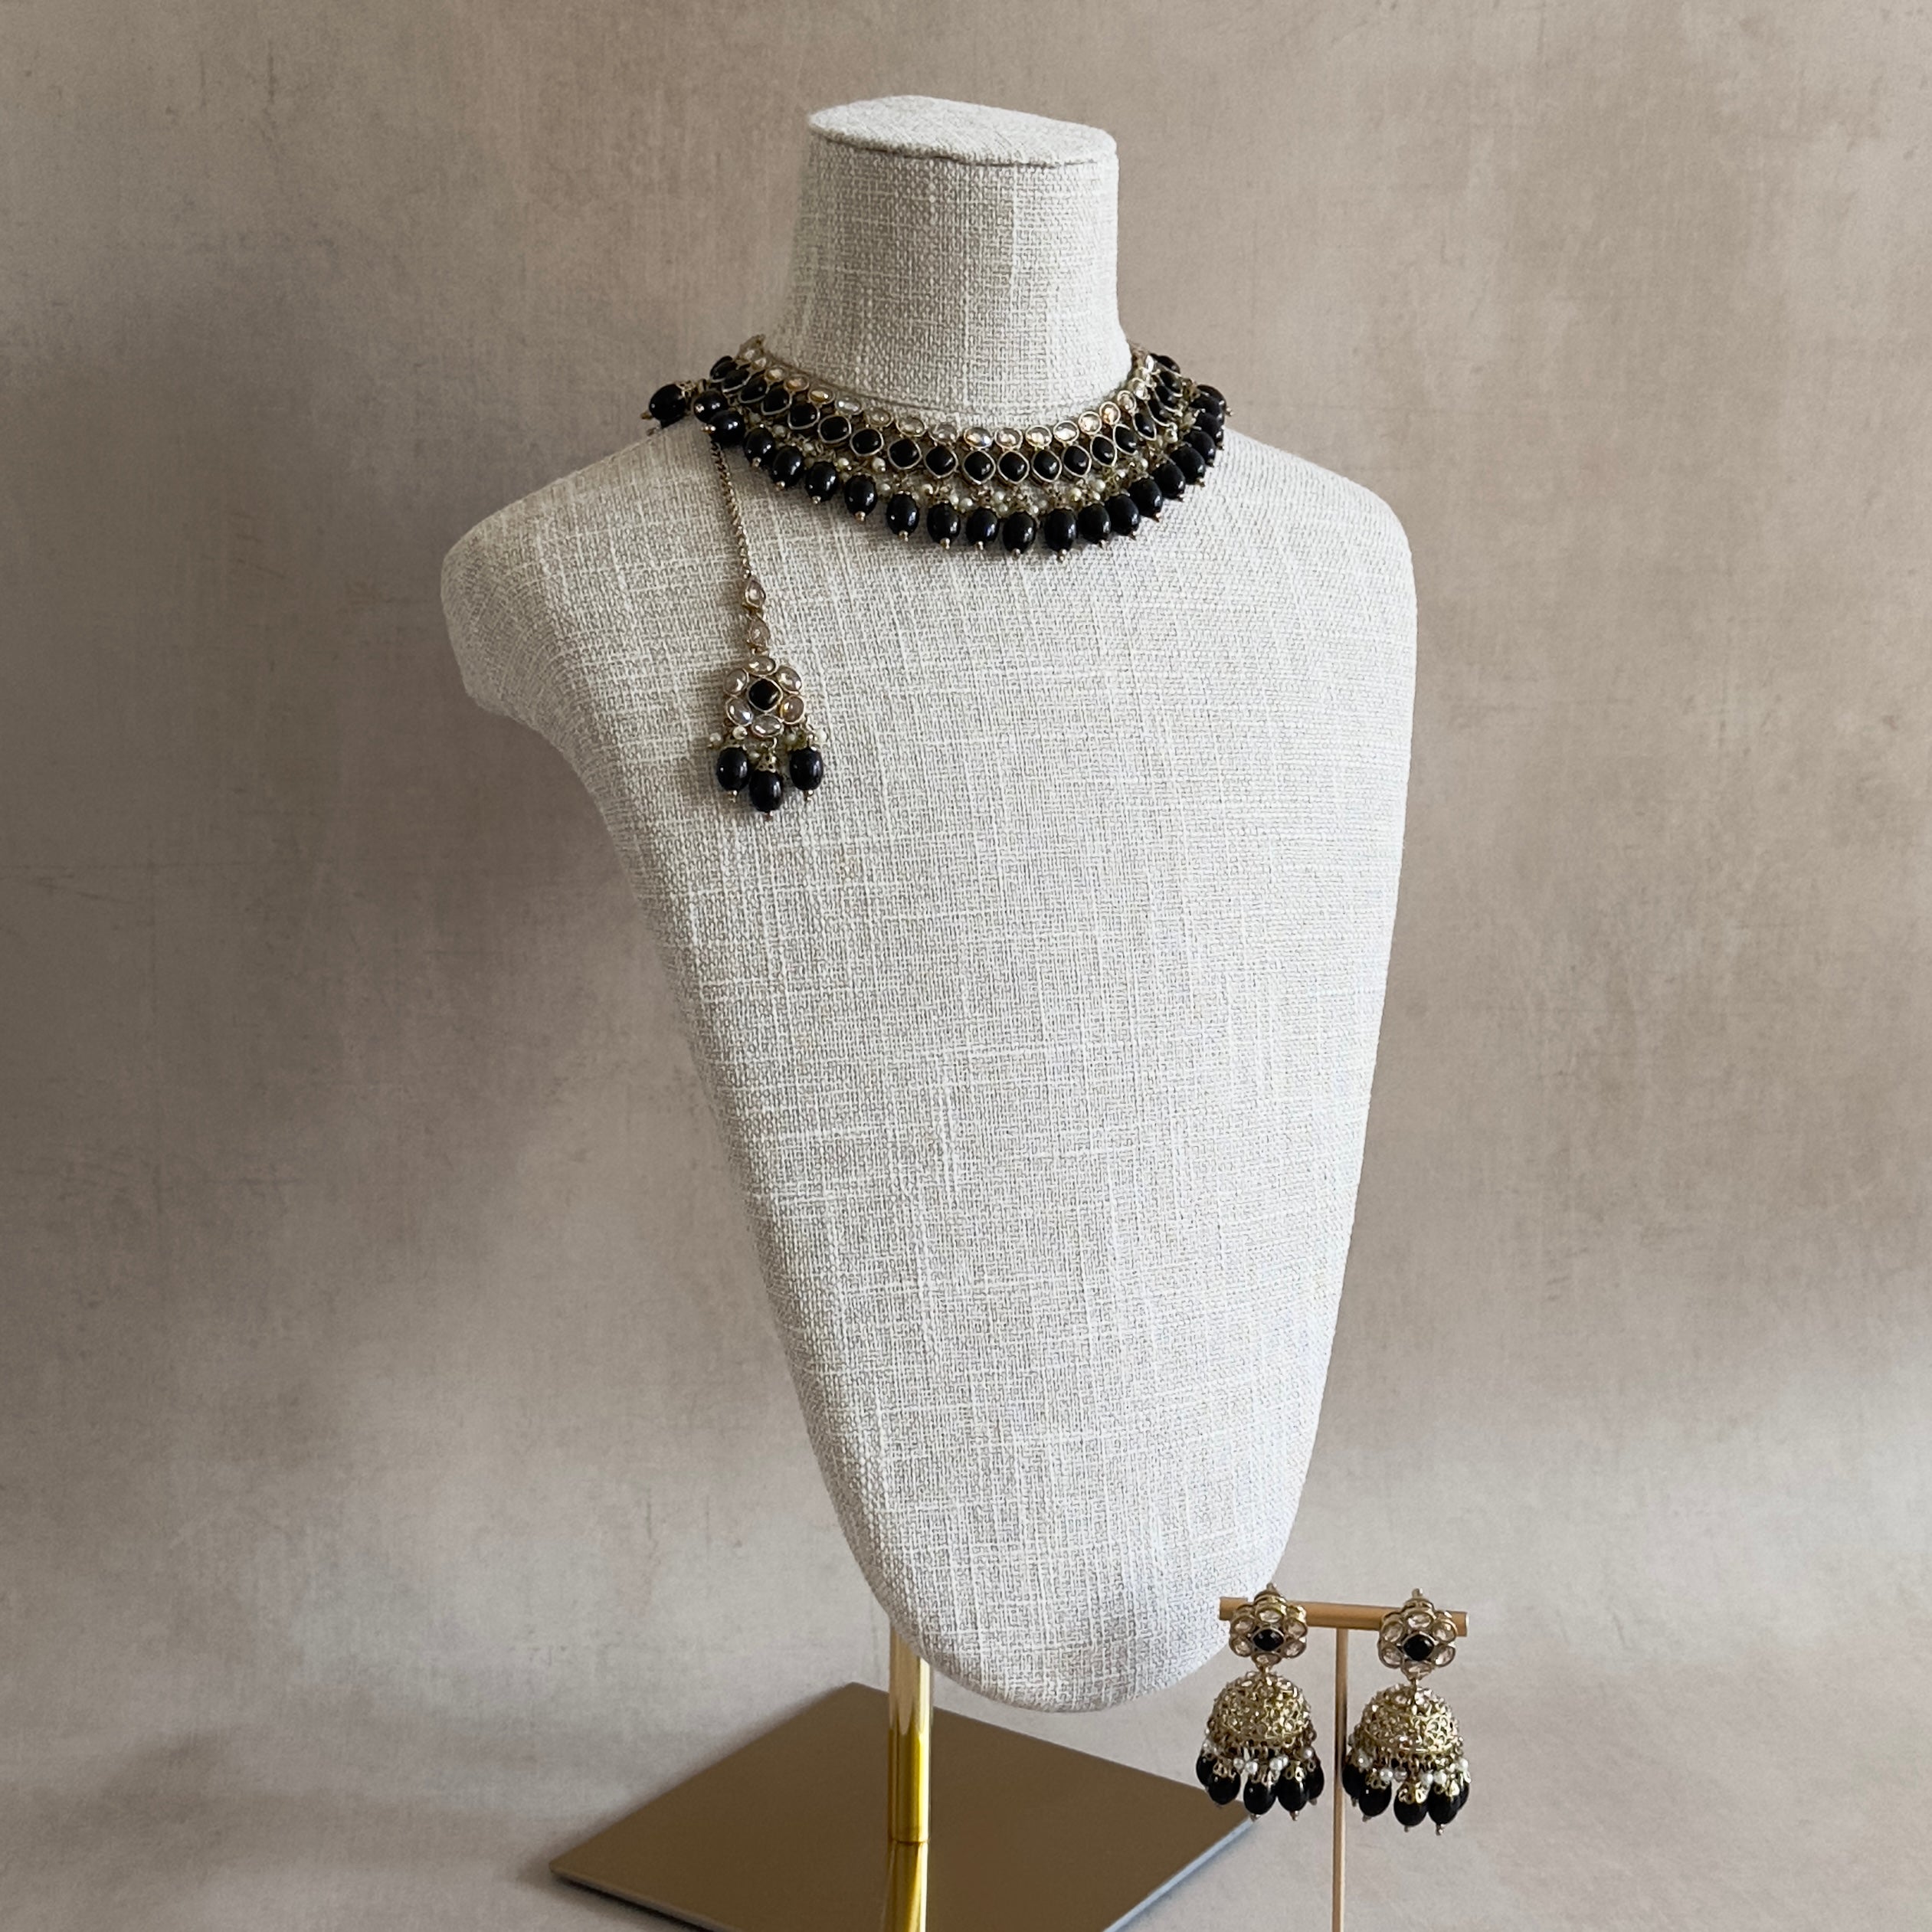 Elevate your outfit with our Keira Black Choker Set! This stunning set features Black Onyx beads in a elegant antique gold finish. The adjustable tie allows for the perfect fit, while the matching earrings and tikka complete the look.&nbsp;